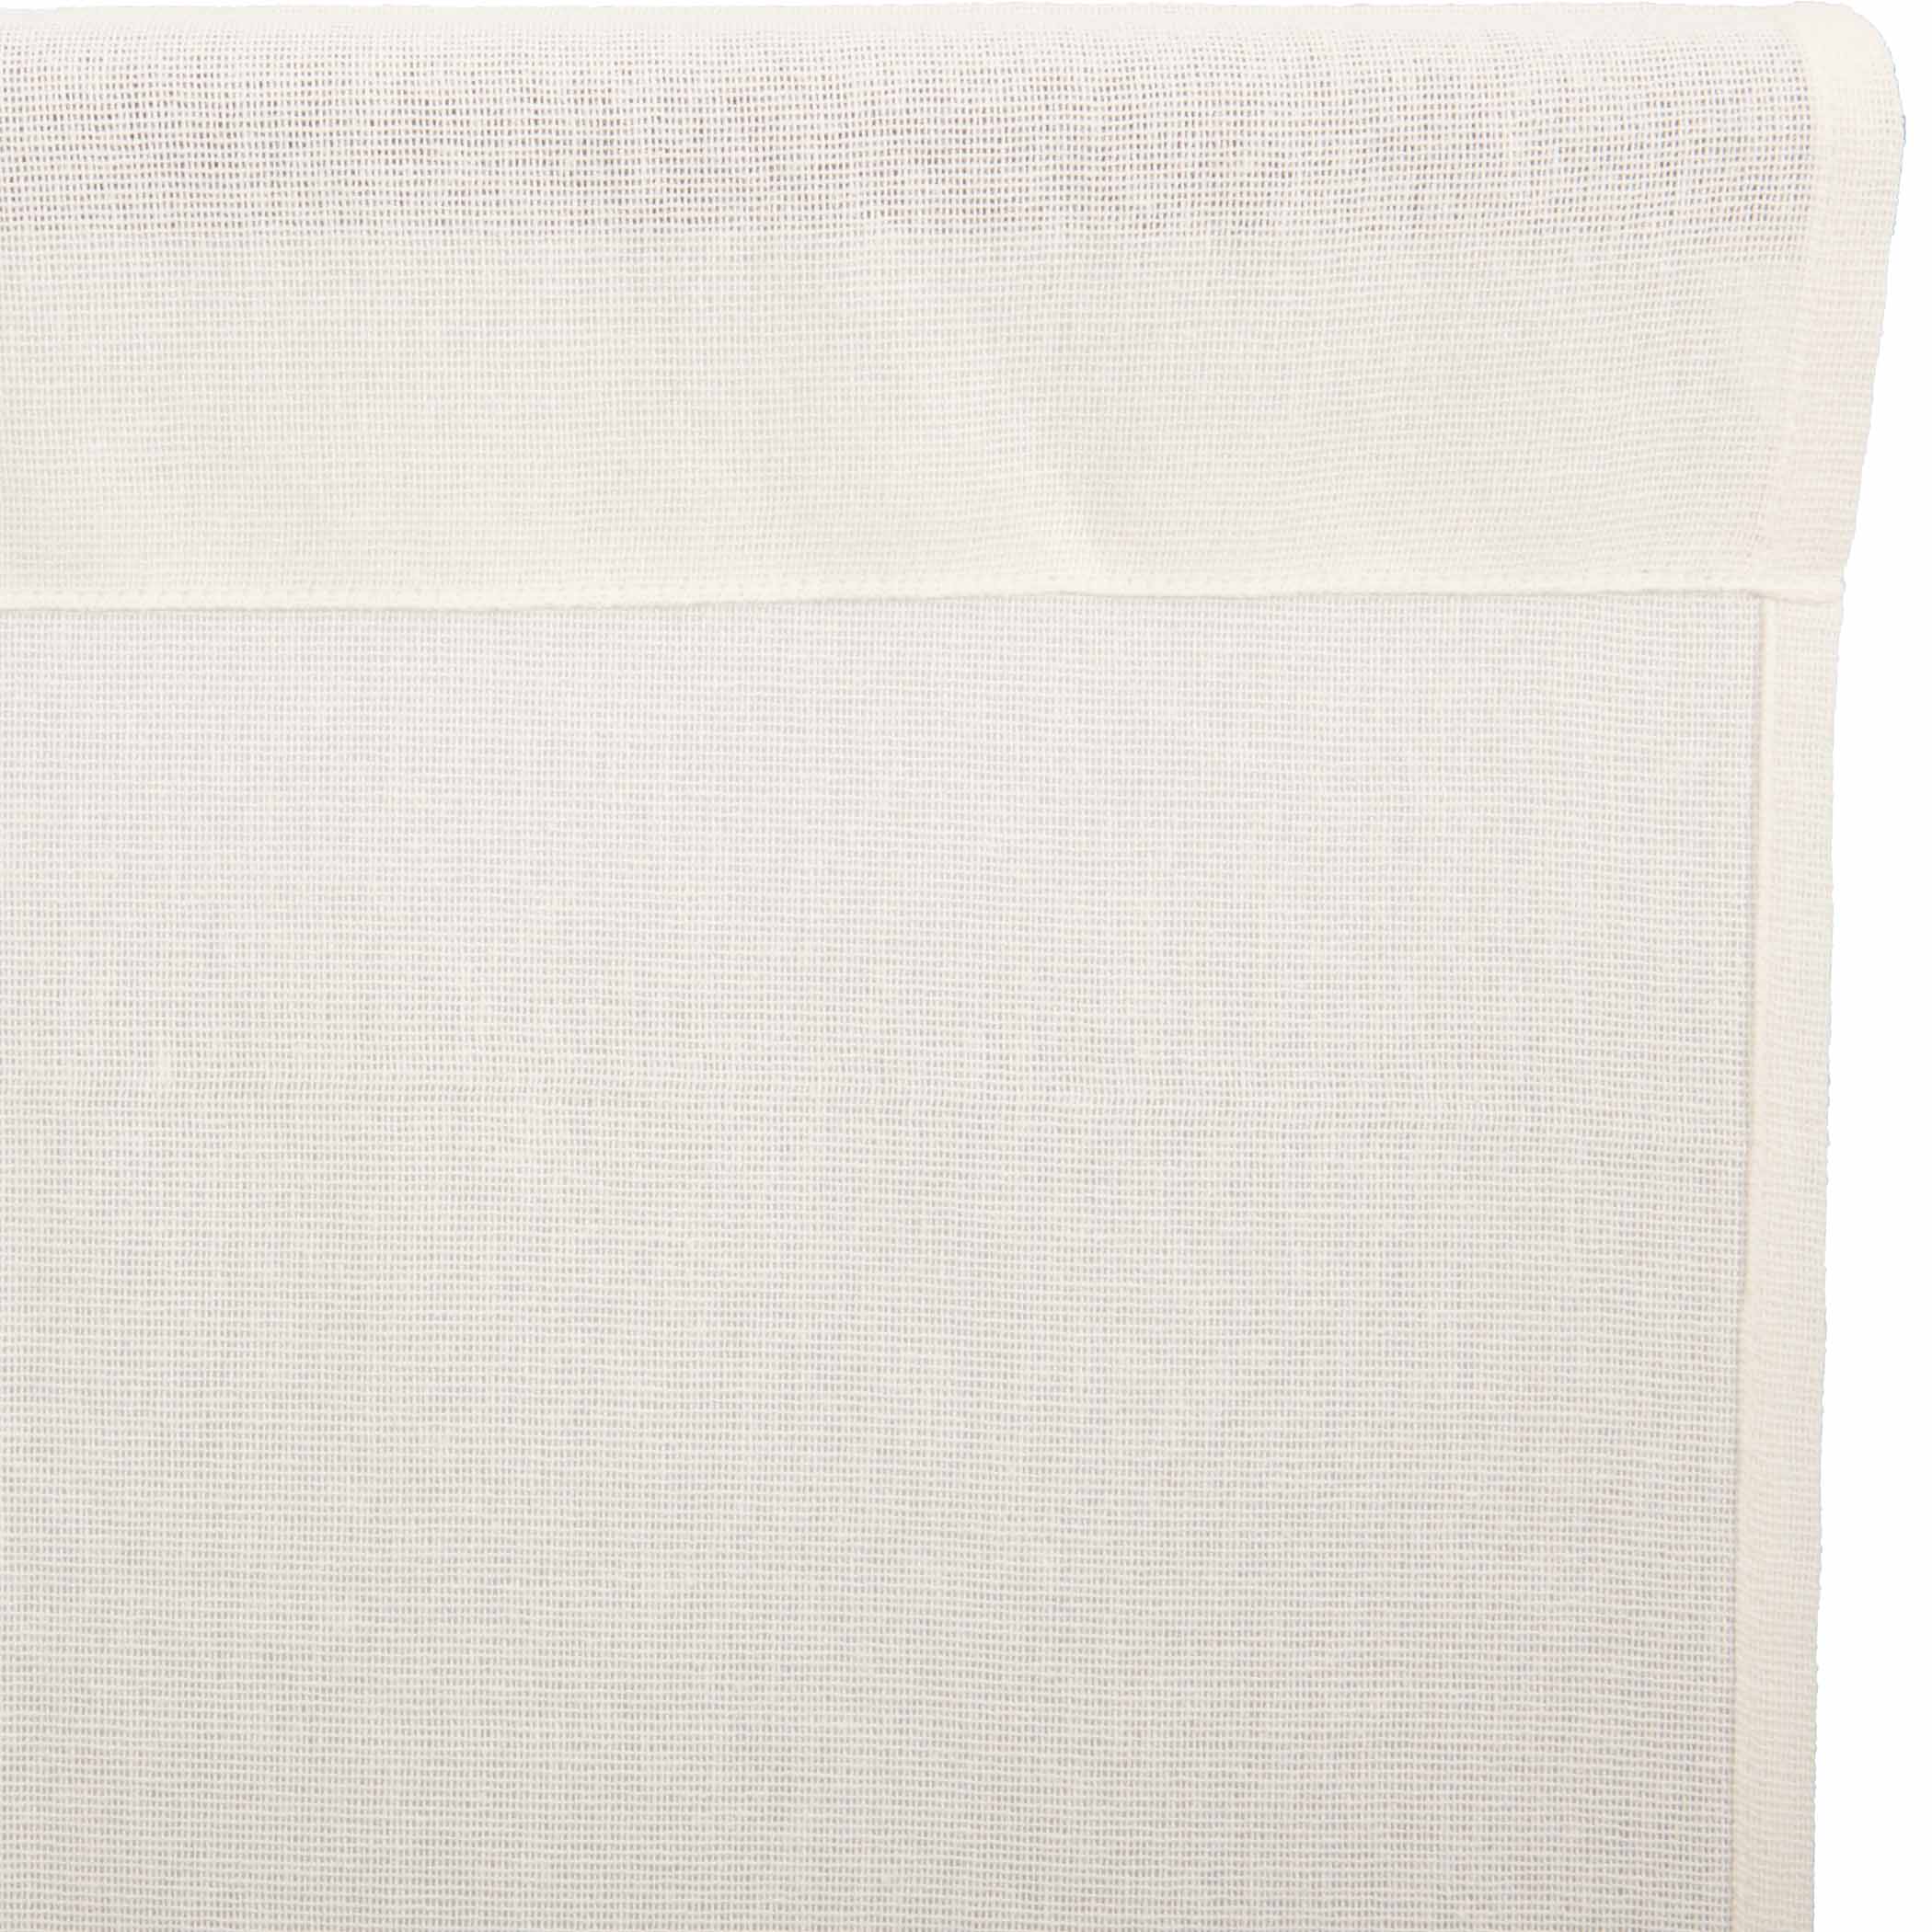 Tobacco Cloth Antique White Prairie Long Panel Curtain Fringed Set of 2 84x36x18 VHC Brands